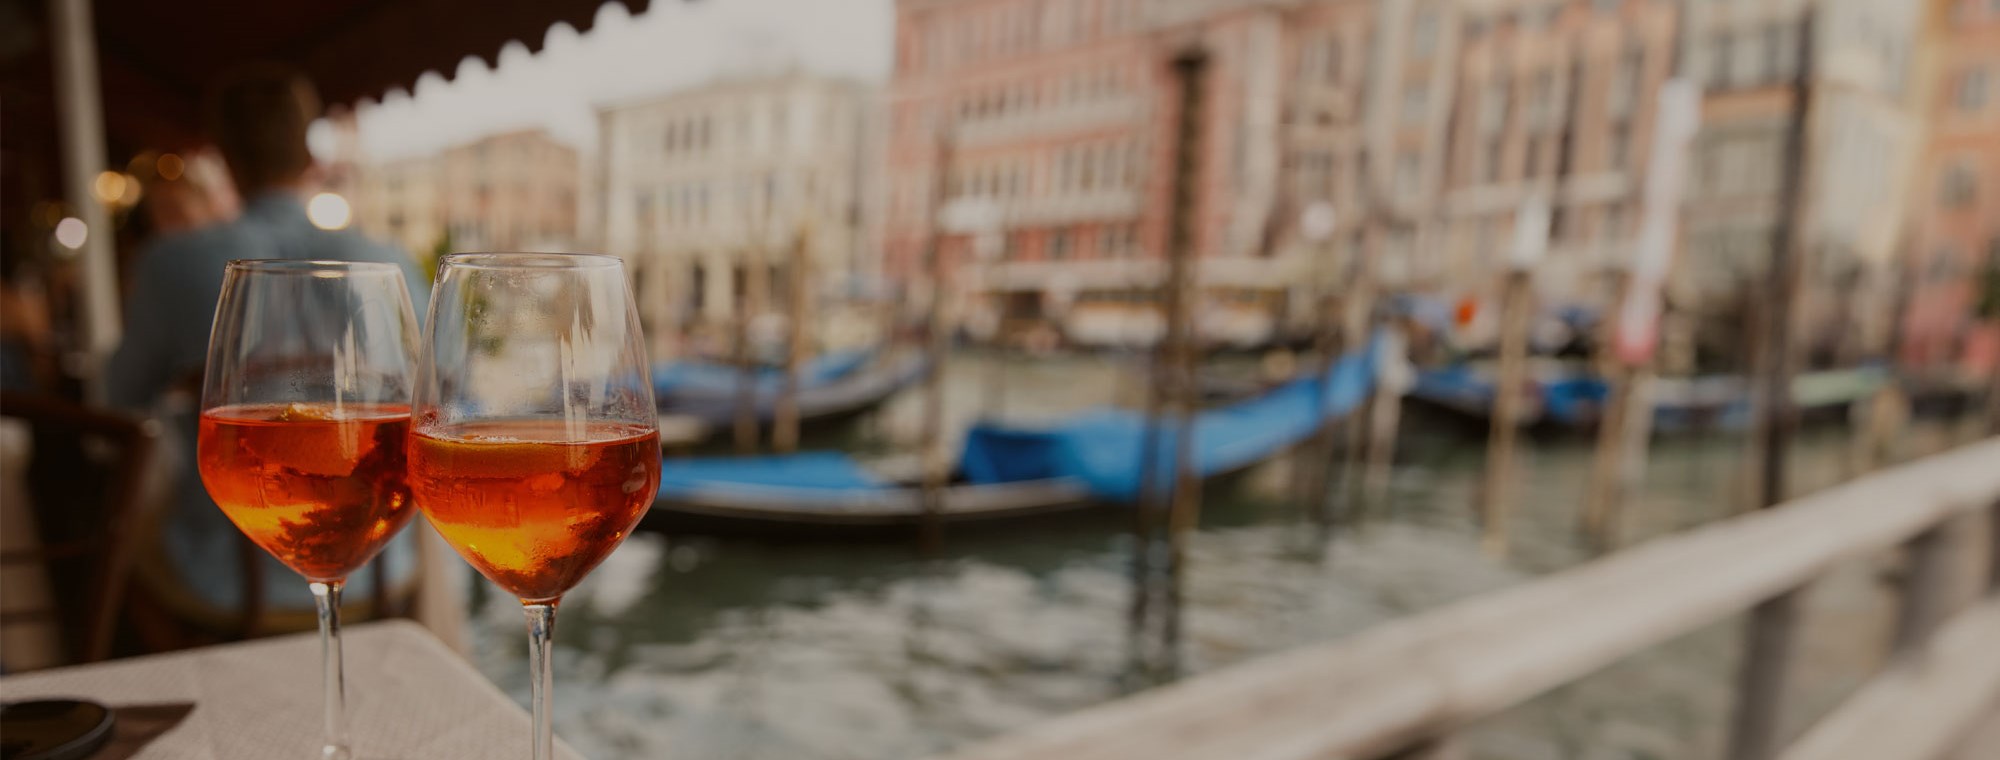 Venice, Italy, enjoying an aperol spritz & watching the gondolas float the canal on our Multi-Country Europe Tours